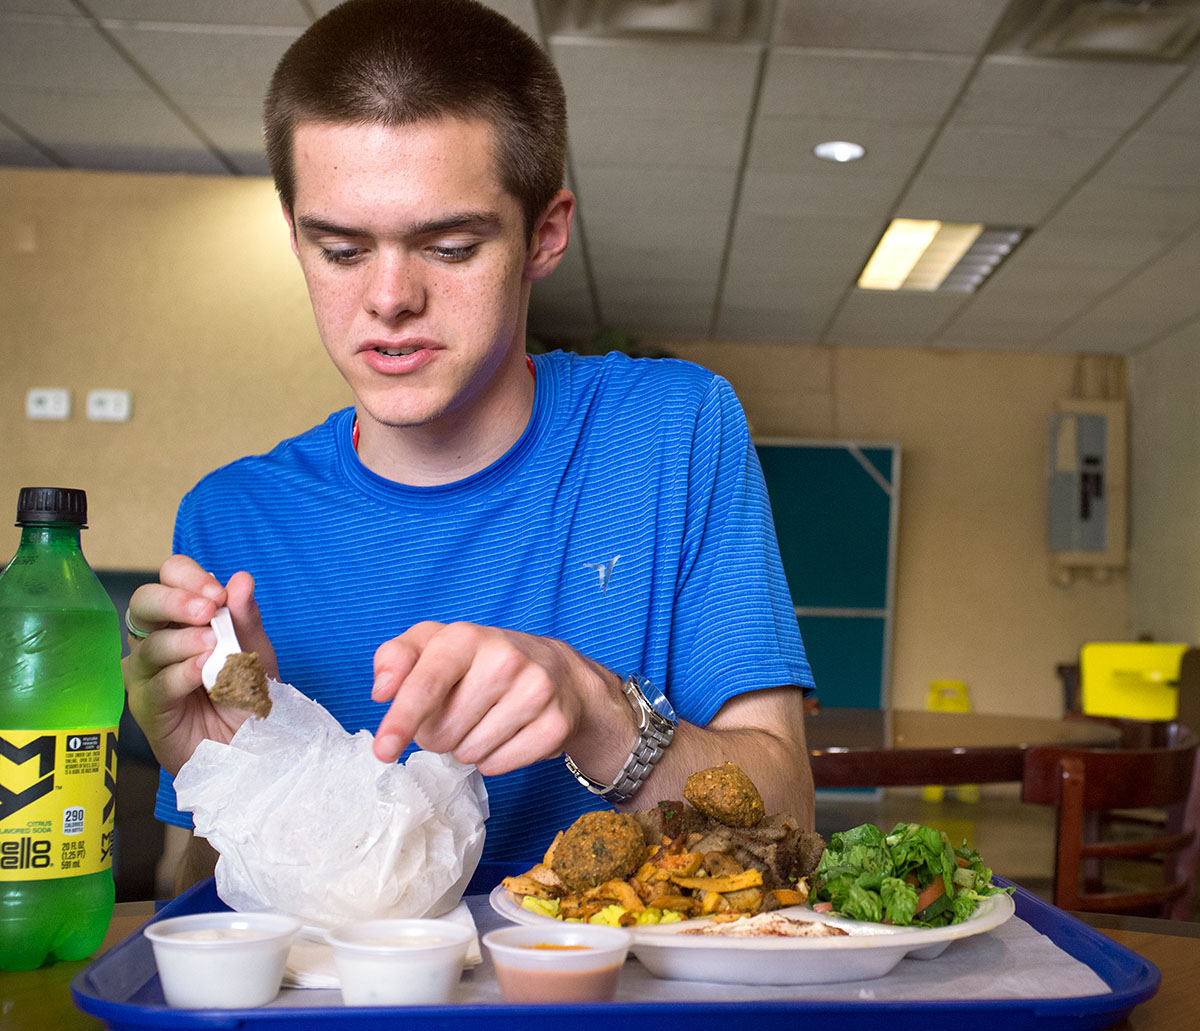 Jake Bowen from Ekron examines the amount of Mediterranean and Middle Eastern food he received during a visit to an international restaurant in Nashville on an Arabic field trip Wednesday, July 13. (Photo by Tucker Allen Covey)